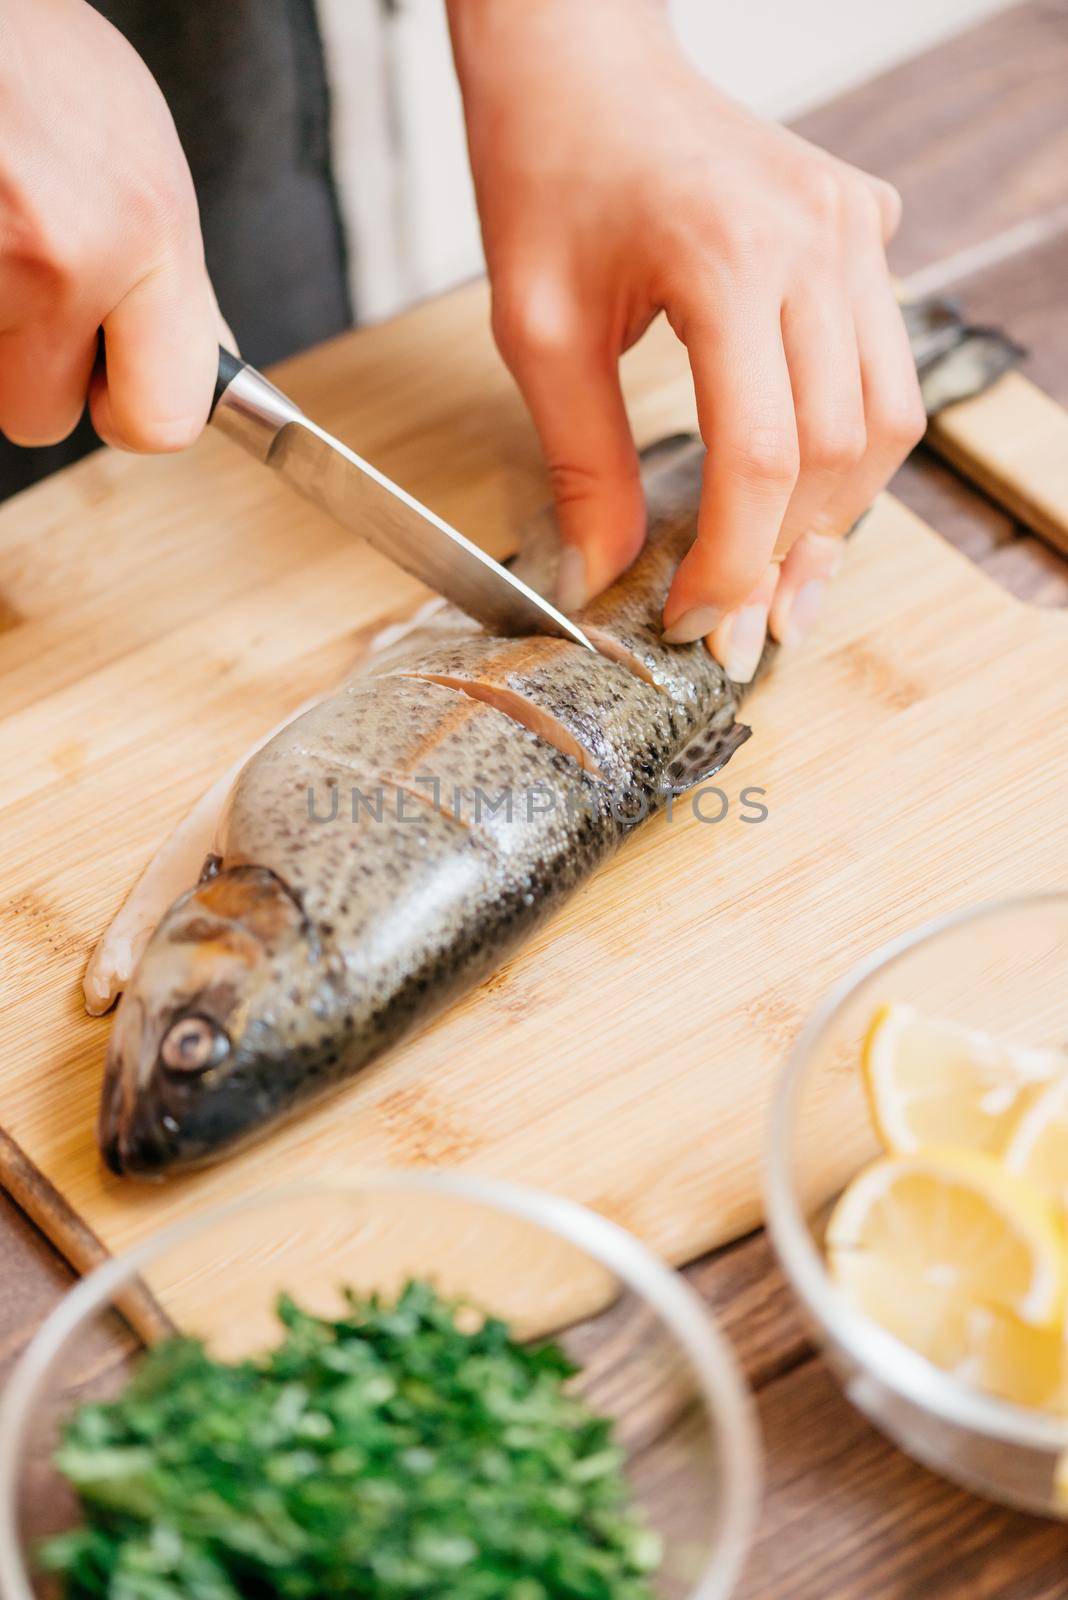 Woman cutting raw trout fish on wooden board for seafood dish in the kitchen, view of hands.